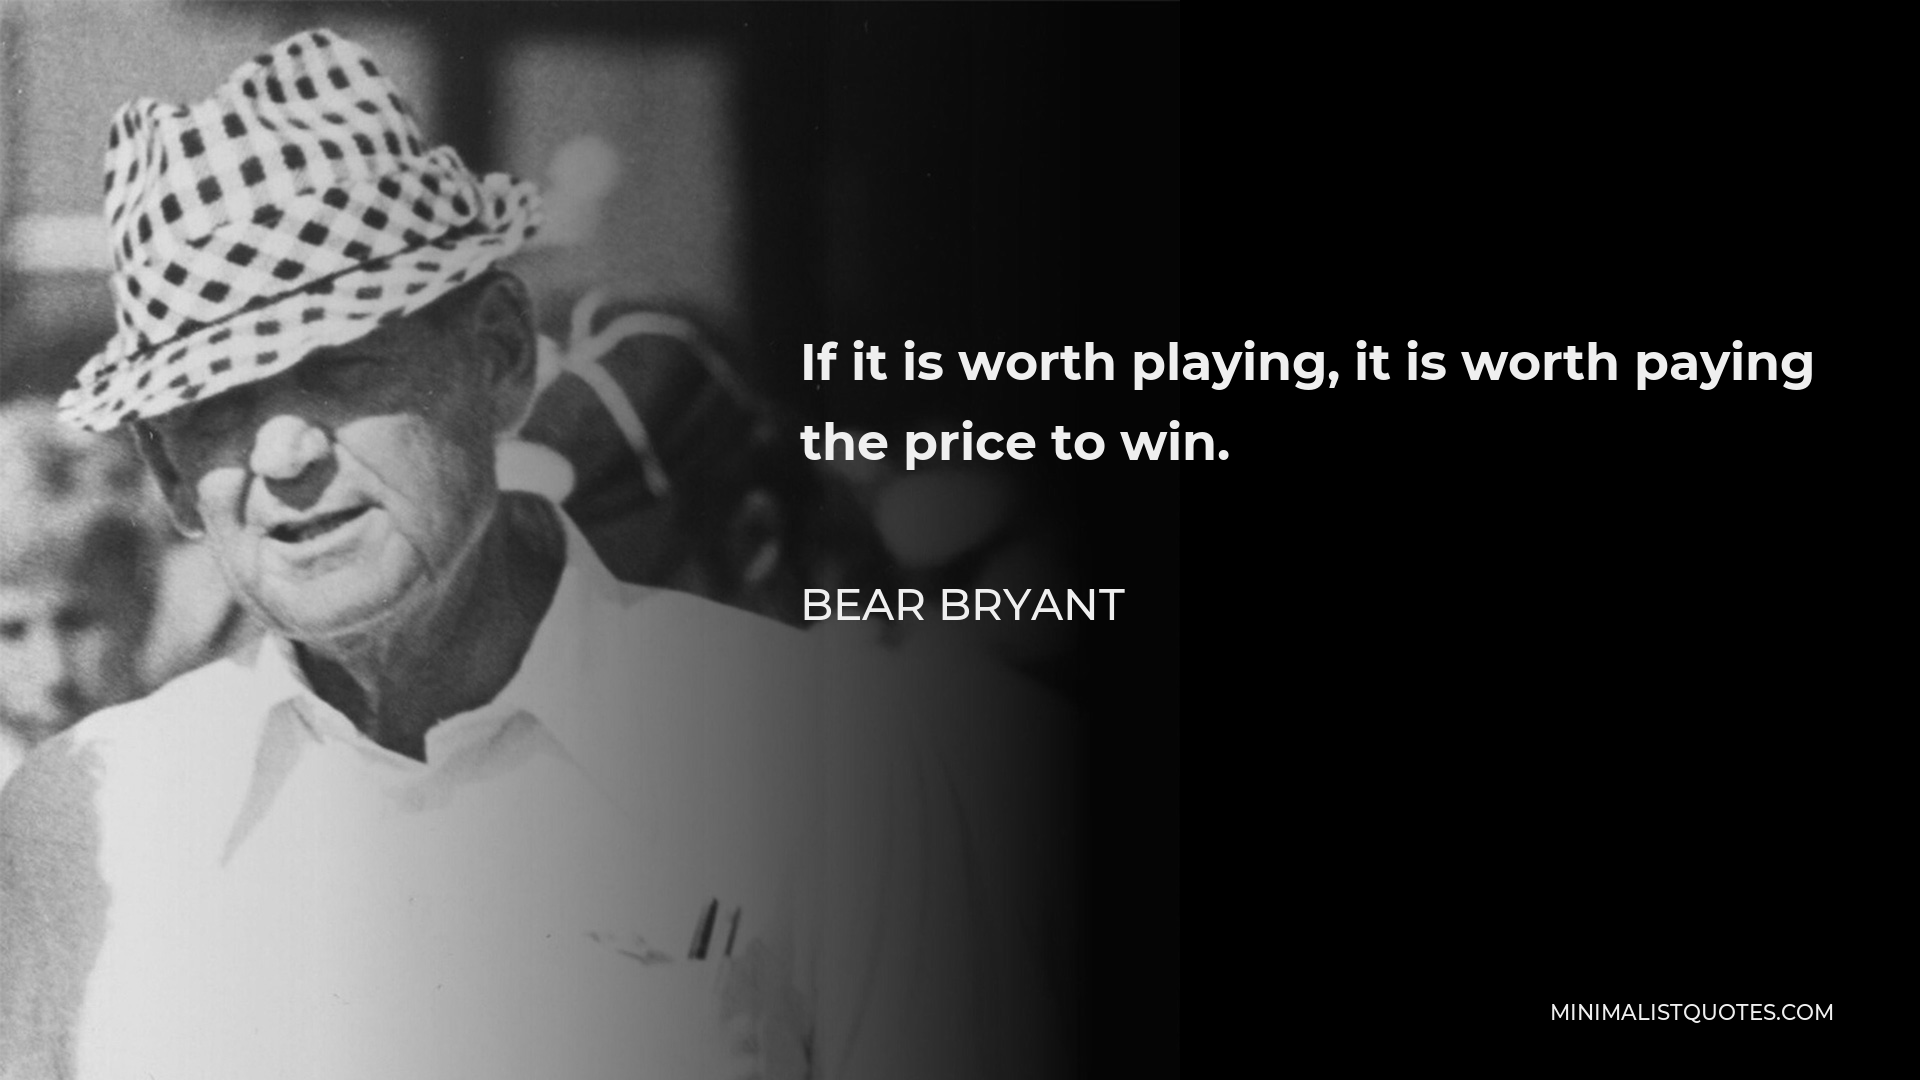 Bear Bryant Quote - If it is worth playing, it is worth paying the price to win.